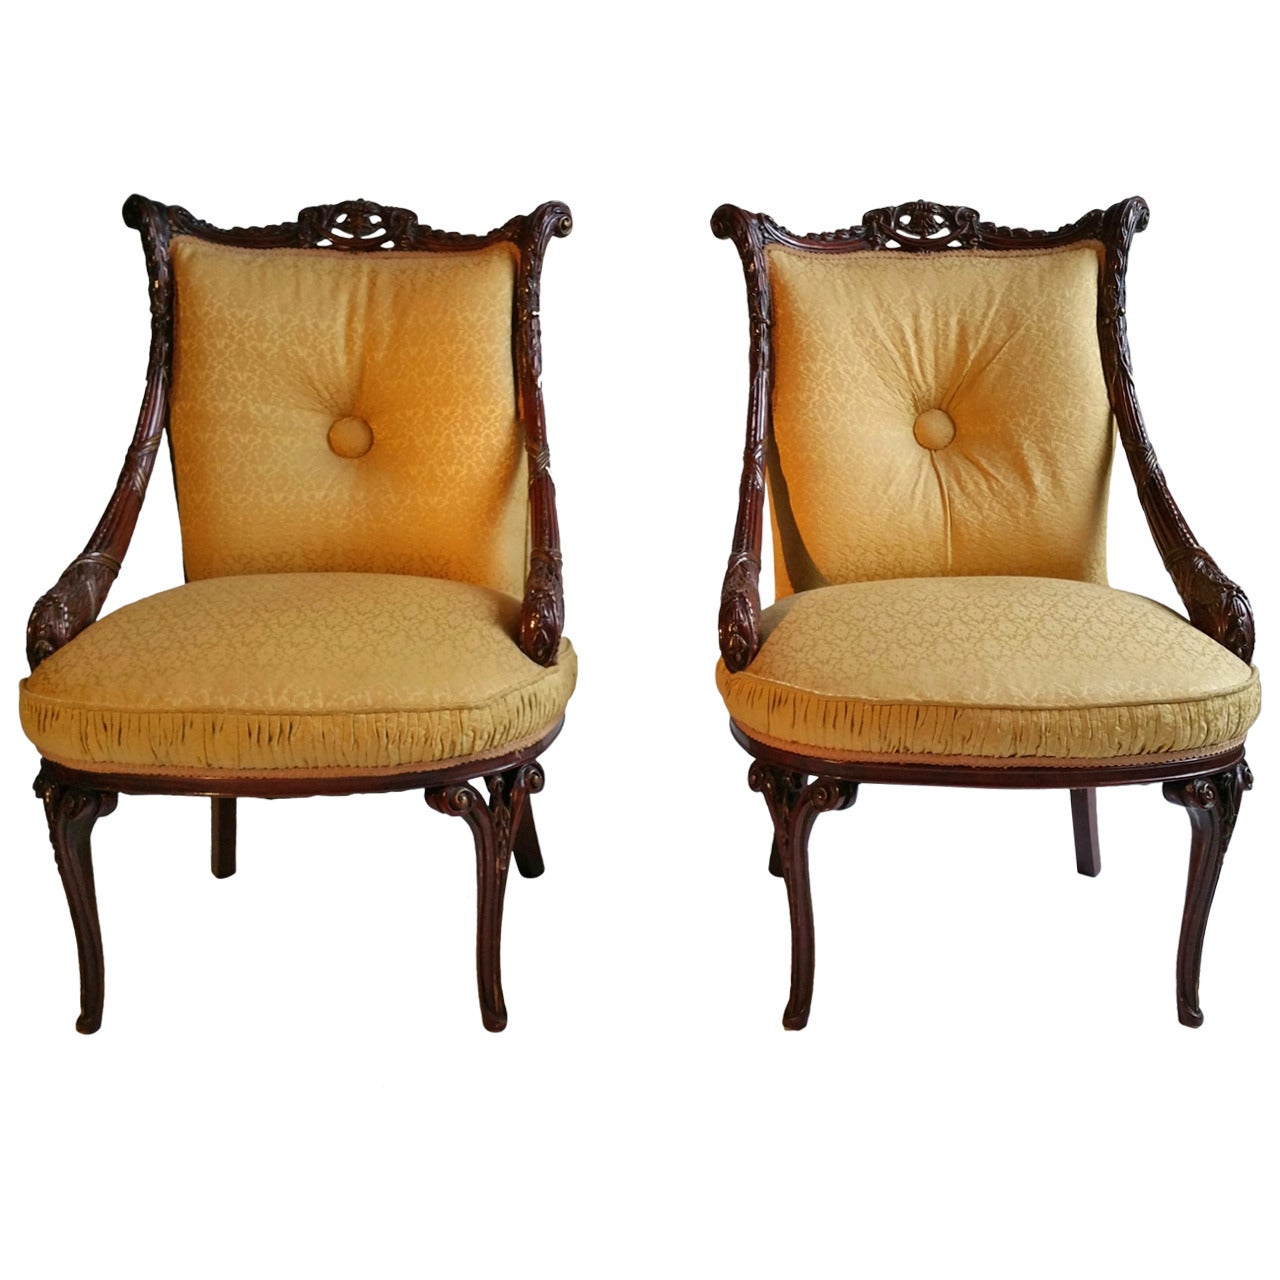 Pair of 1940s Hollywood Regency Chairs  Attributed to Grosfeld House